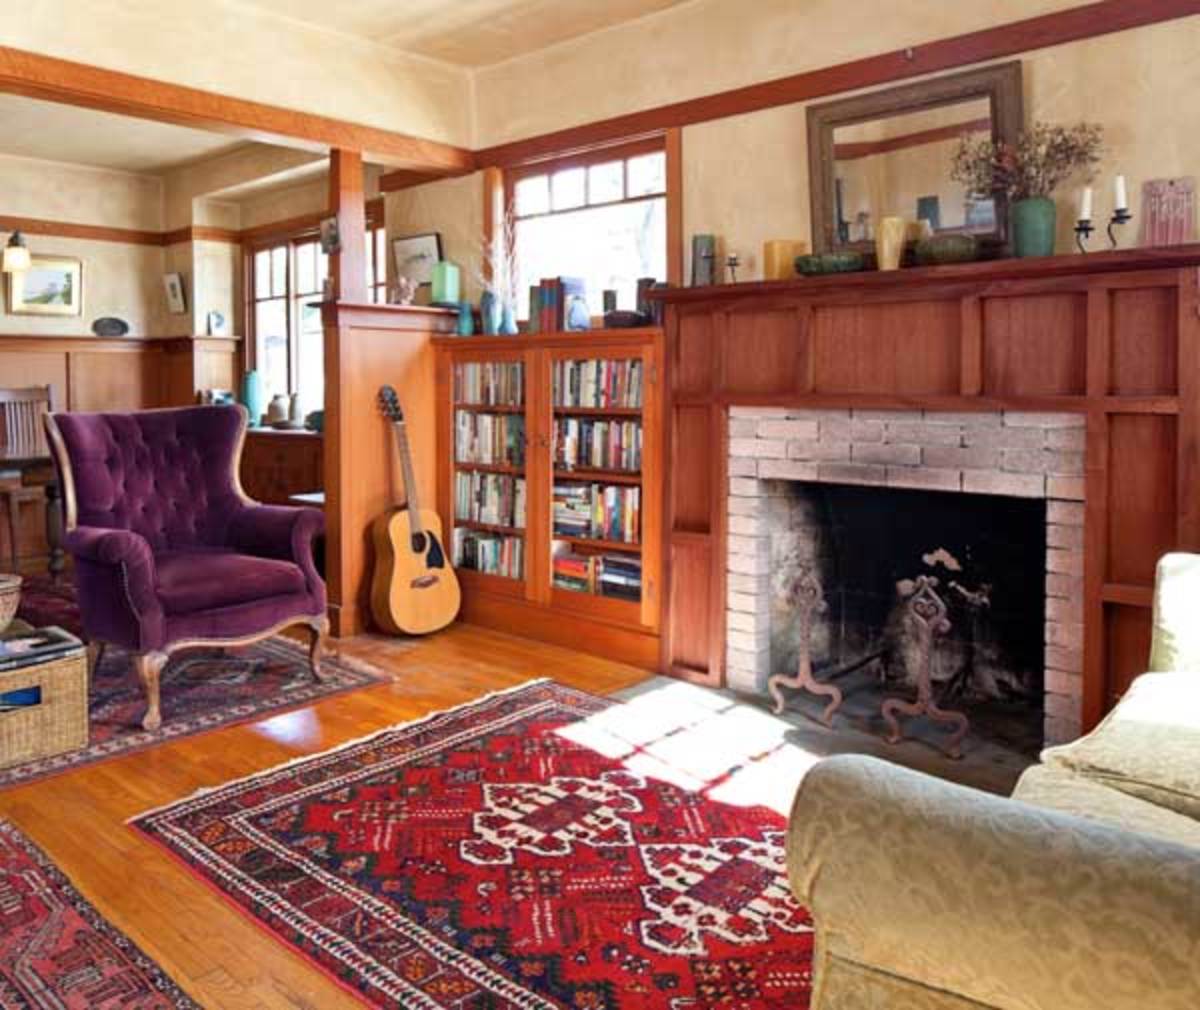 The owner built the woodwork, mostly in Douglas fir; the mahogany fireplace surround was an early project.